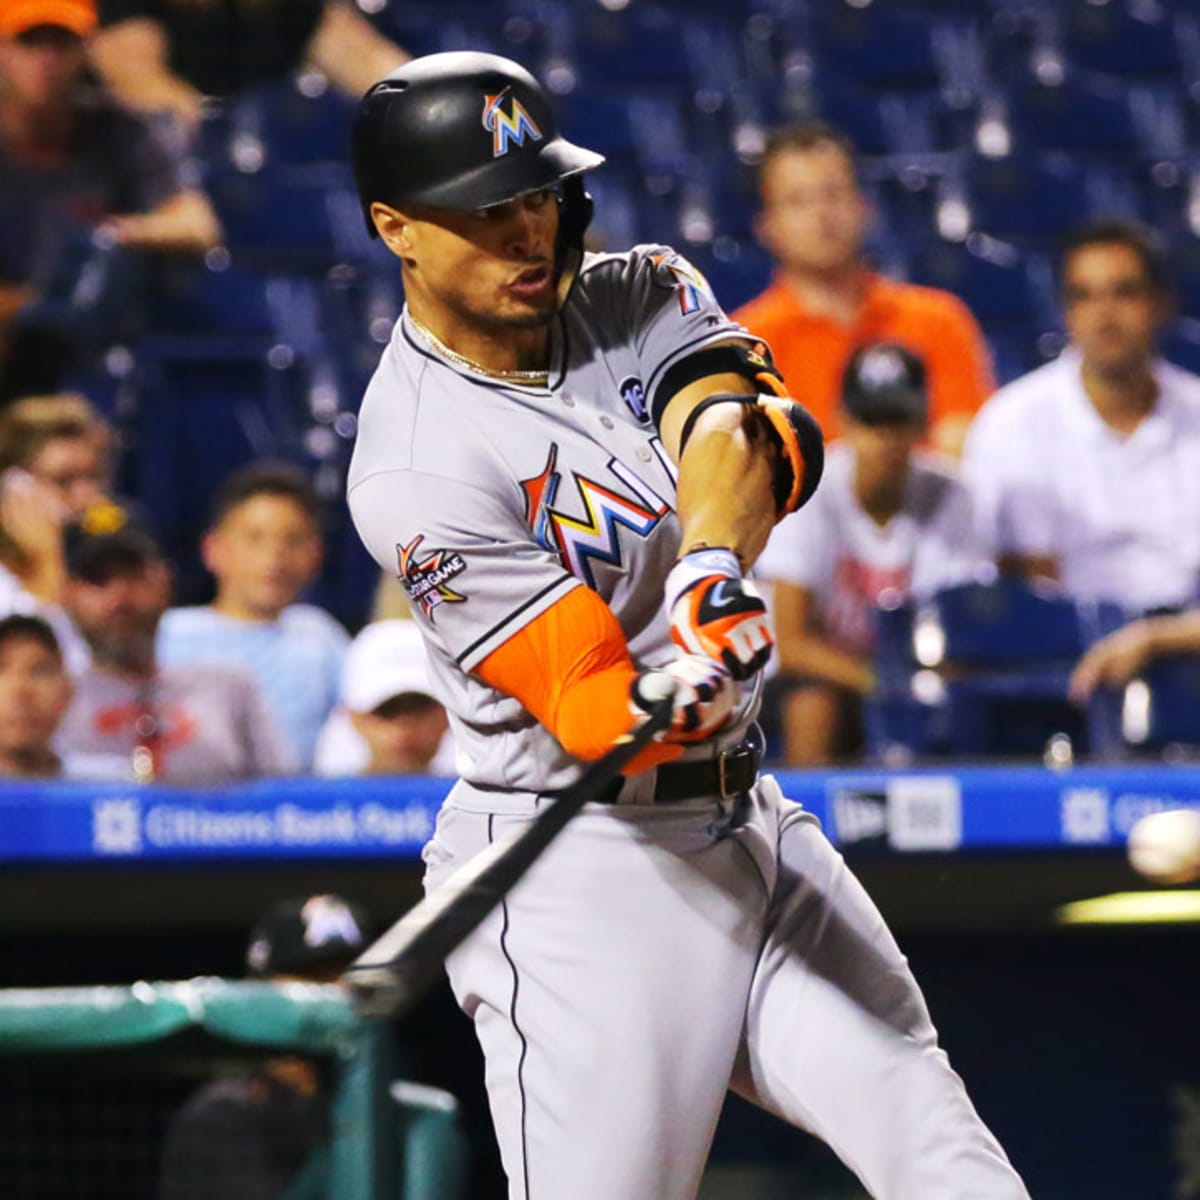 Giancarlo Stanton setting torrid pace in hitting home runs for Marlins